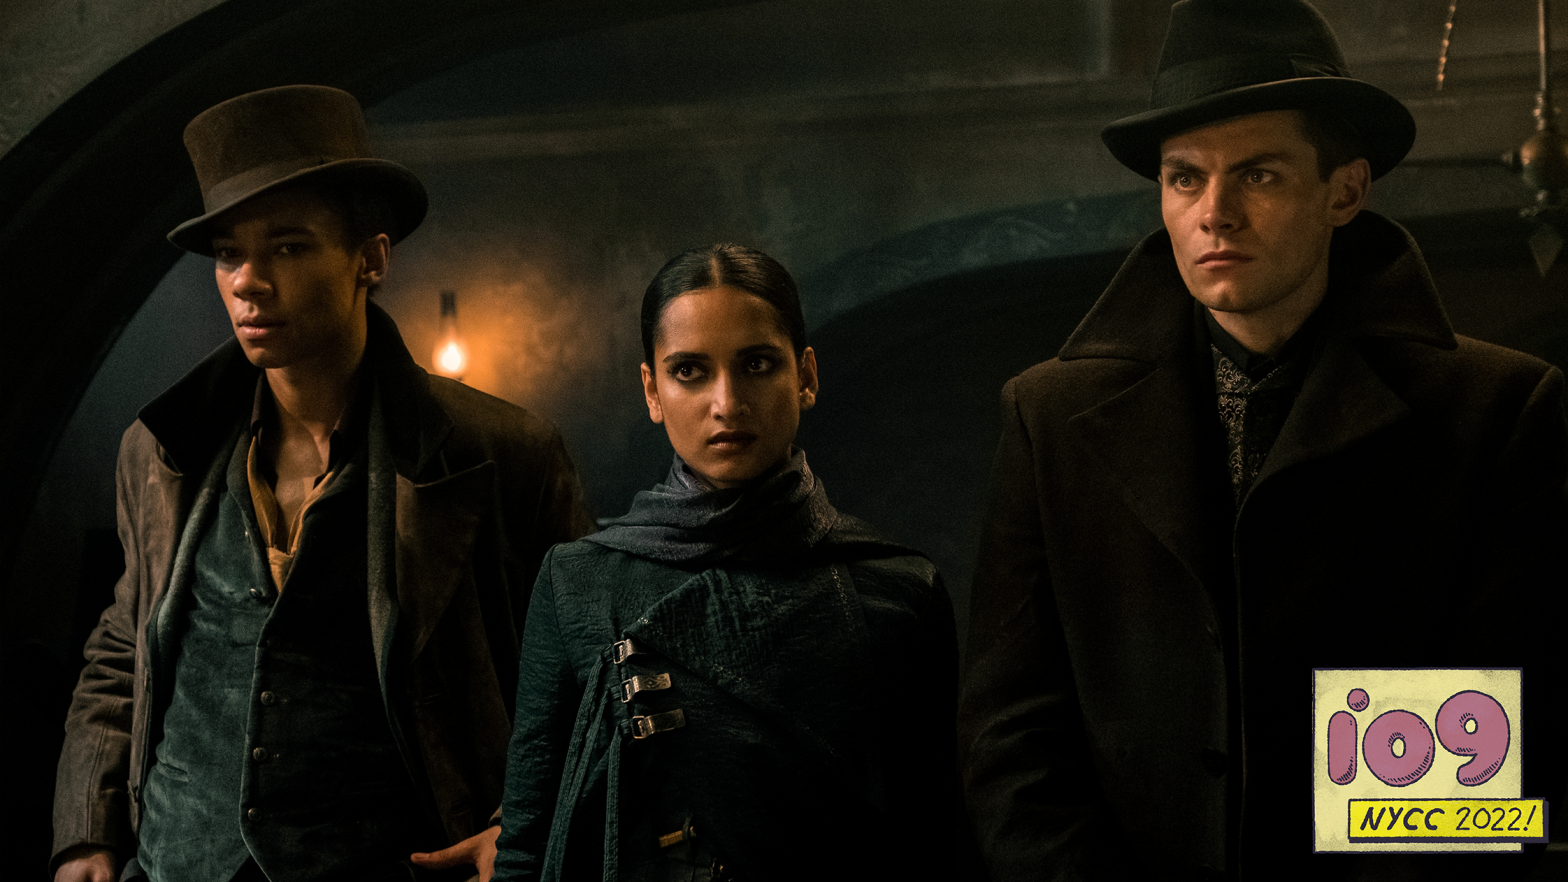 Kit Young, Amita Suman, and Freddy Carter as the Crows. (Image: Netflix | David Appleby)